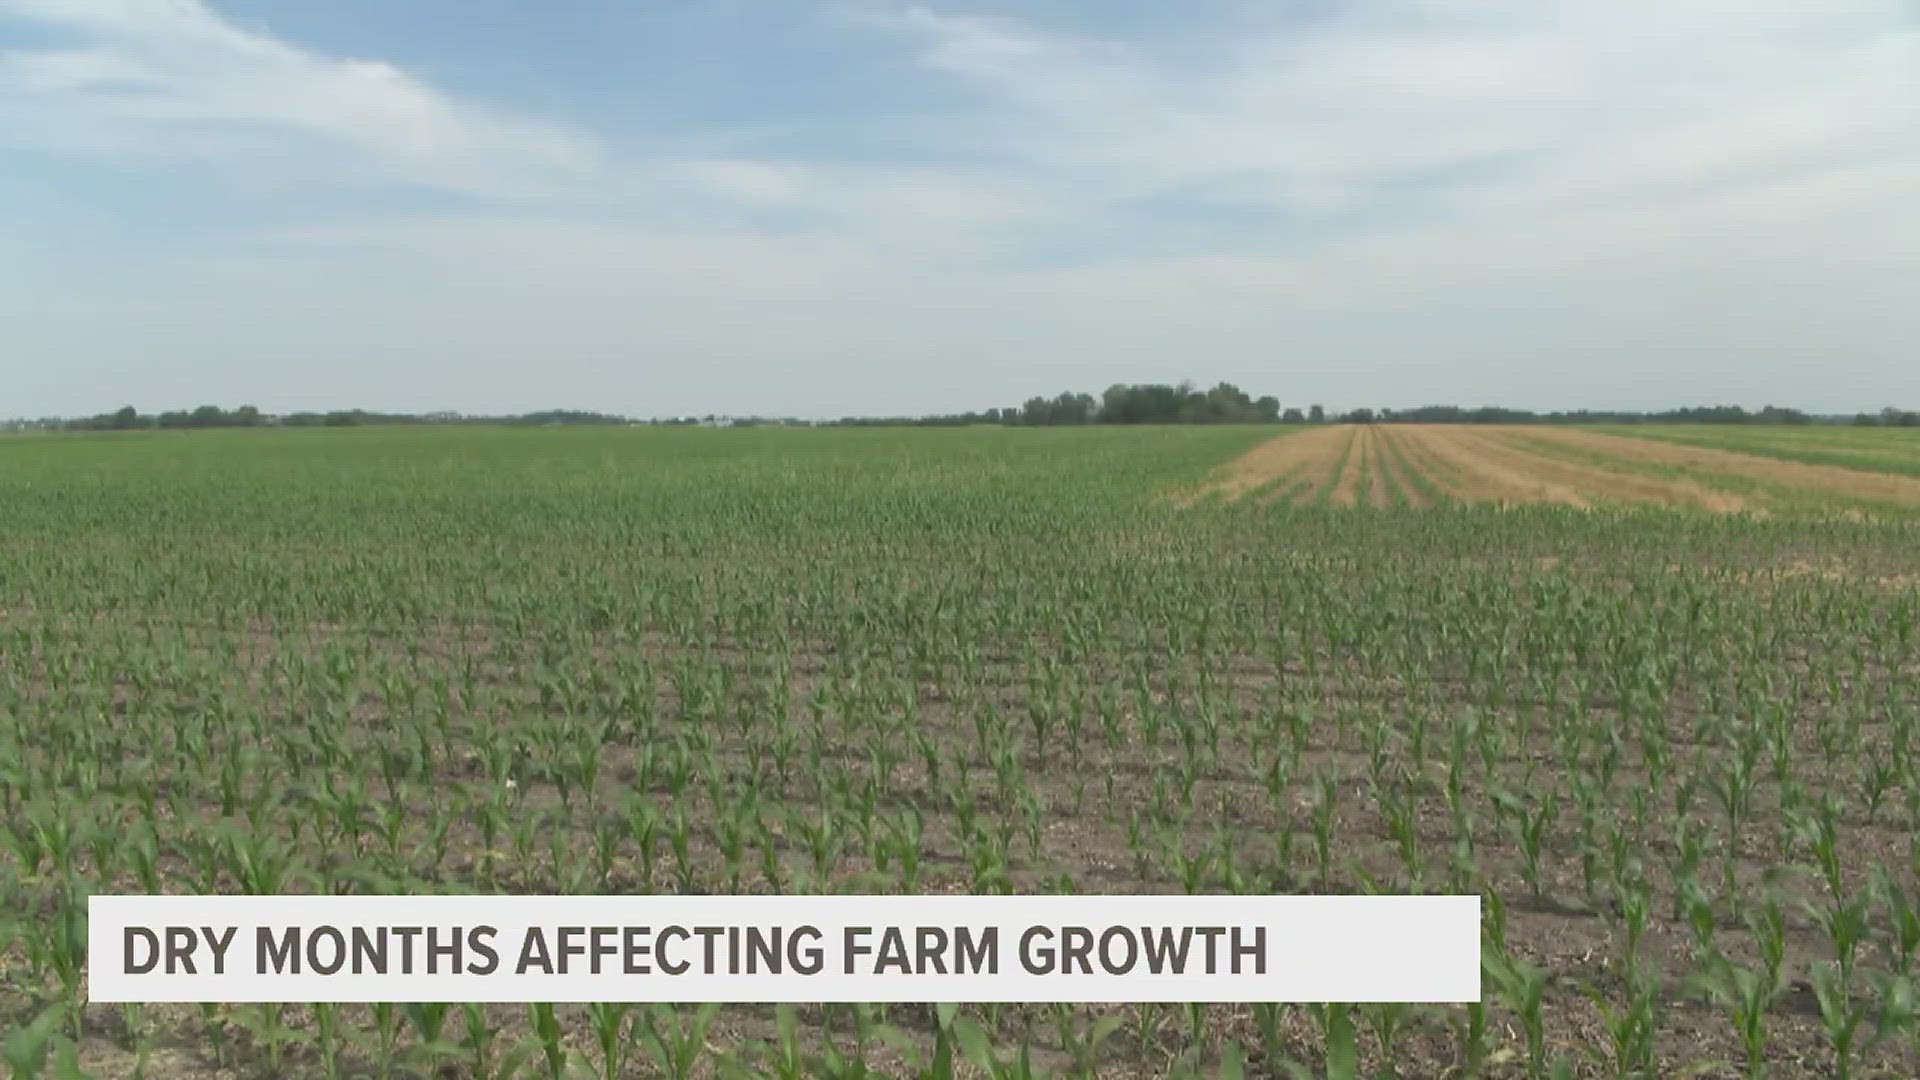 Brian Hora said his crops are growing, but hots days have been putting stress on his corn and beans.